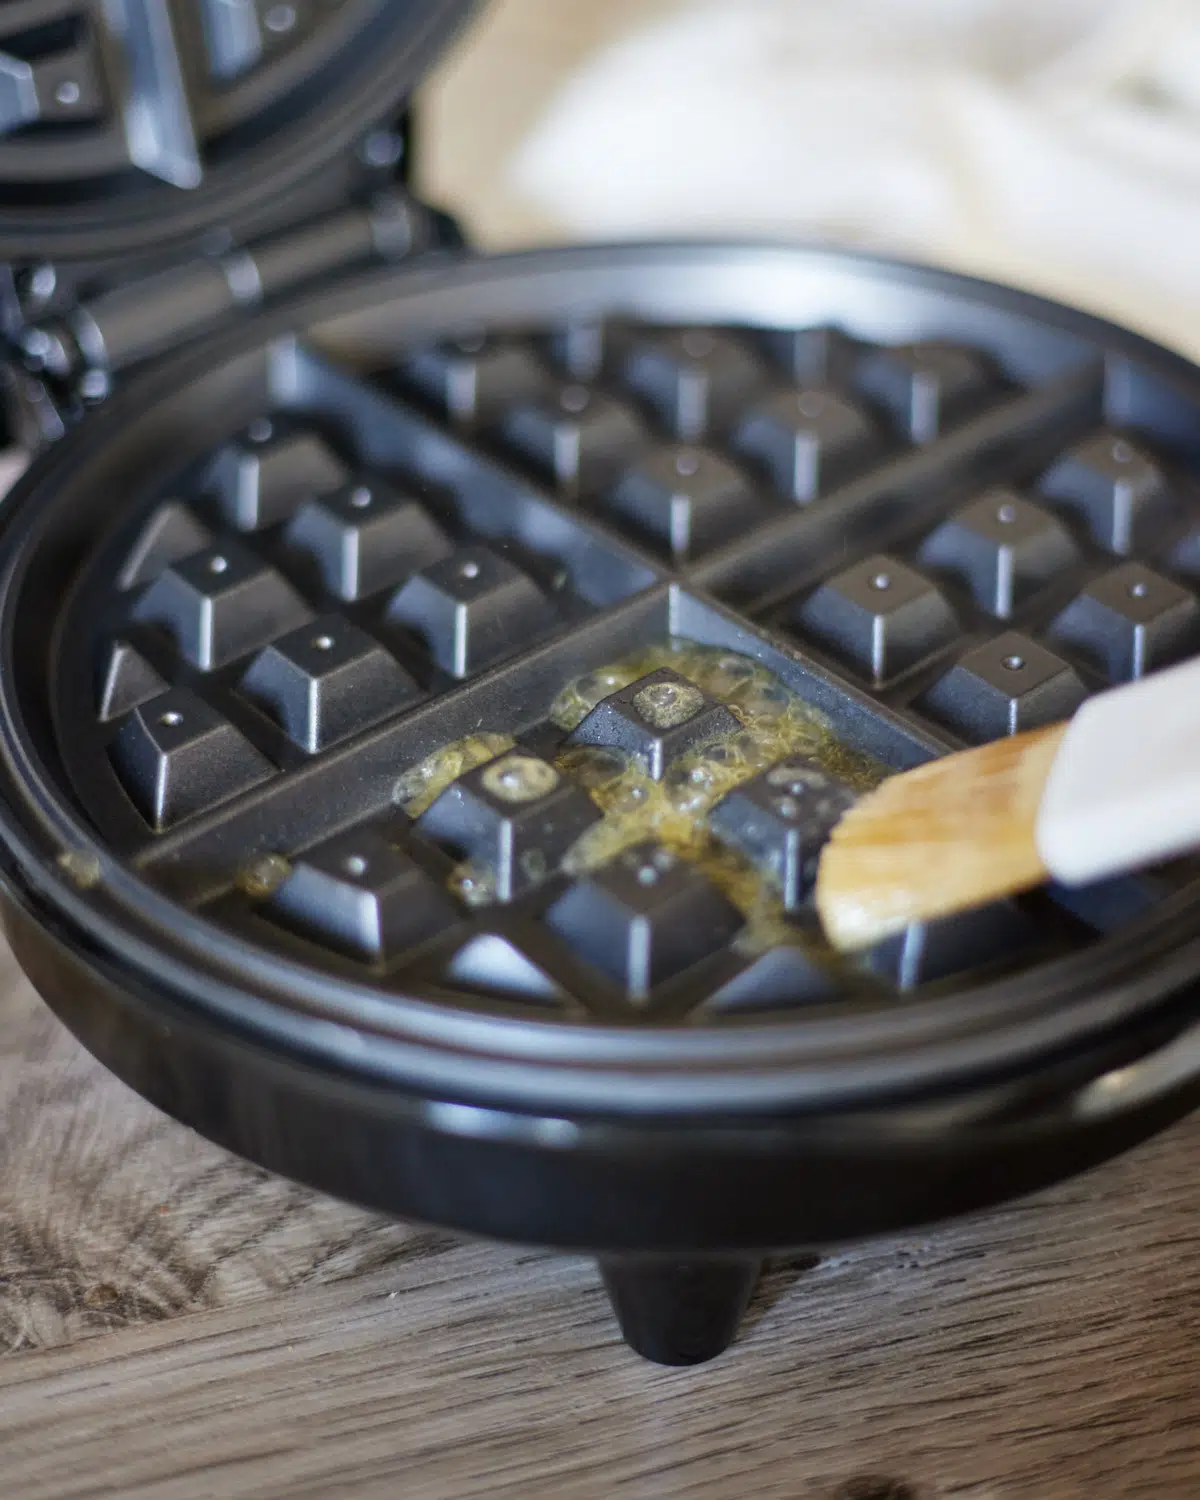 butter being brushed onto a hot waffle iron. 